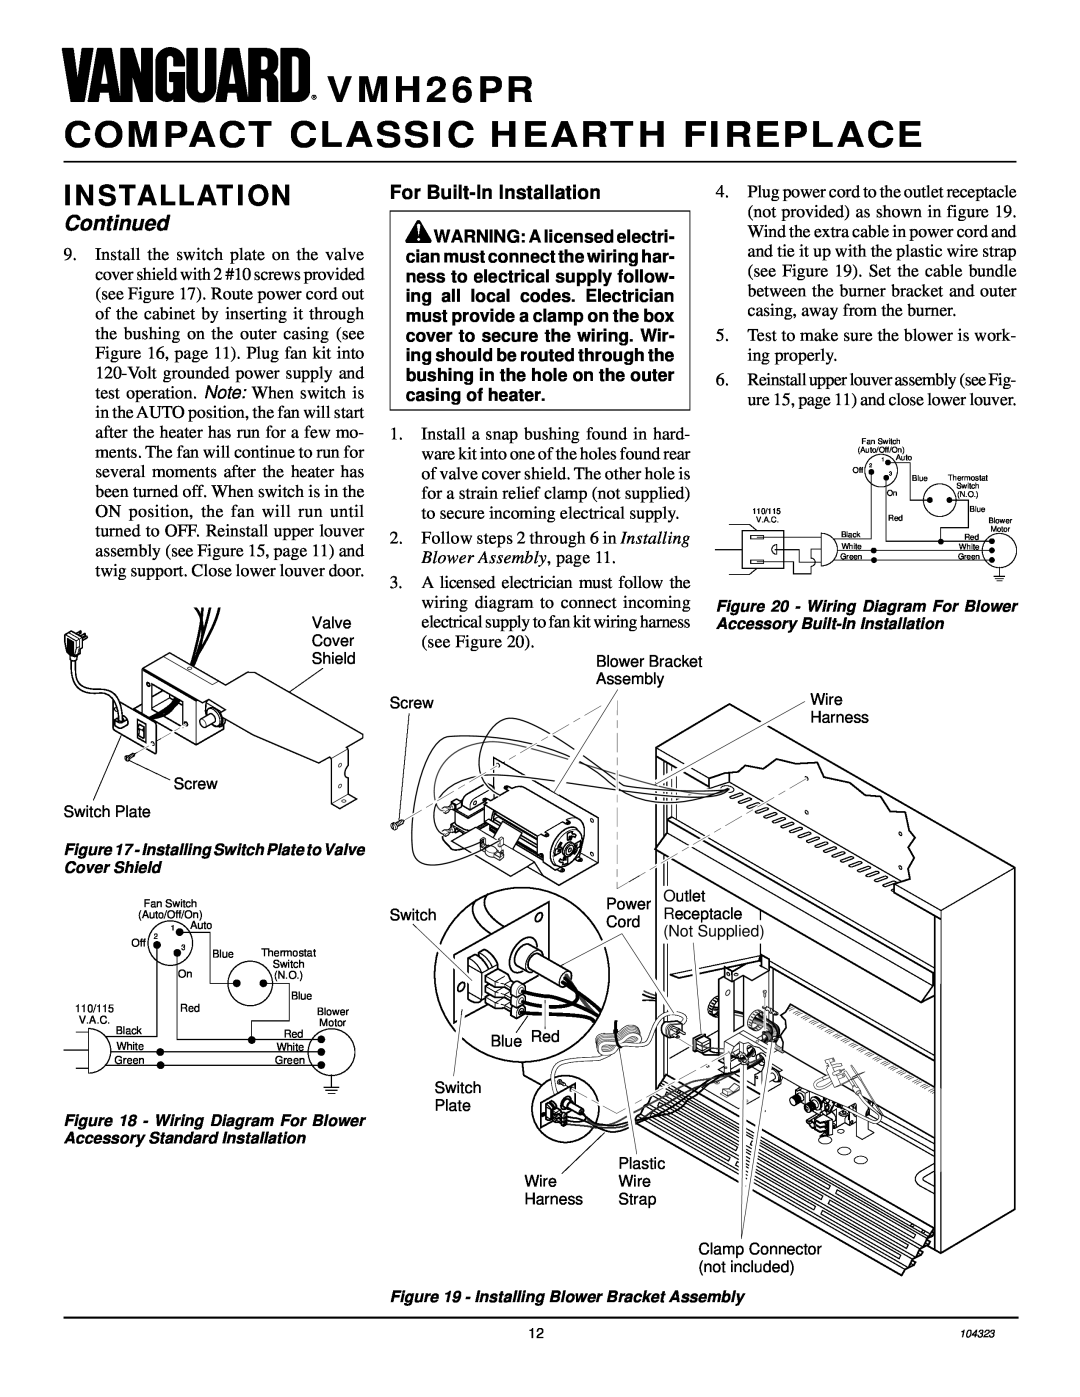 Desa For Built-InInstallation, VMH26PR COMPACT CLASSIC HEARTH FIREPLACE, Continued, Wiring Diagram For Blower 